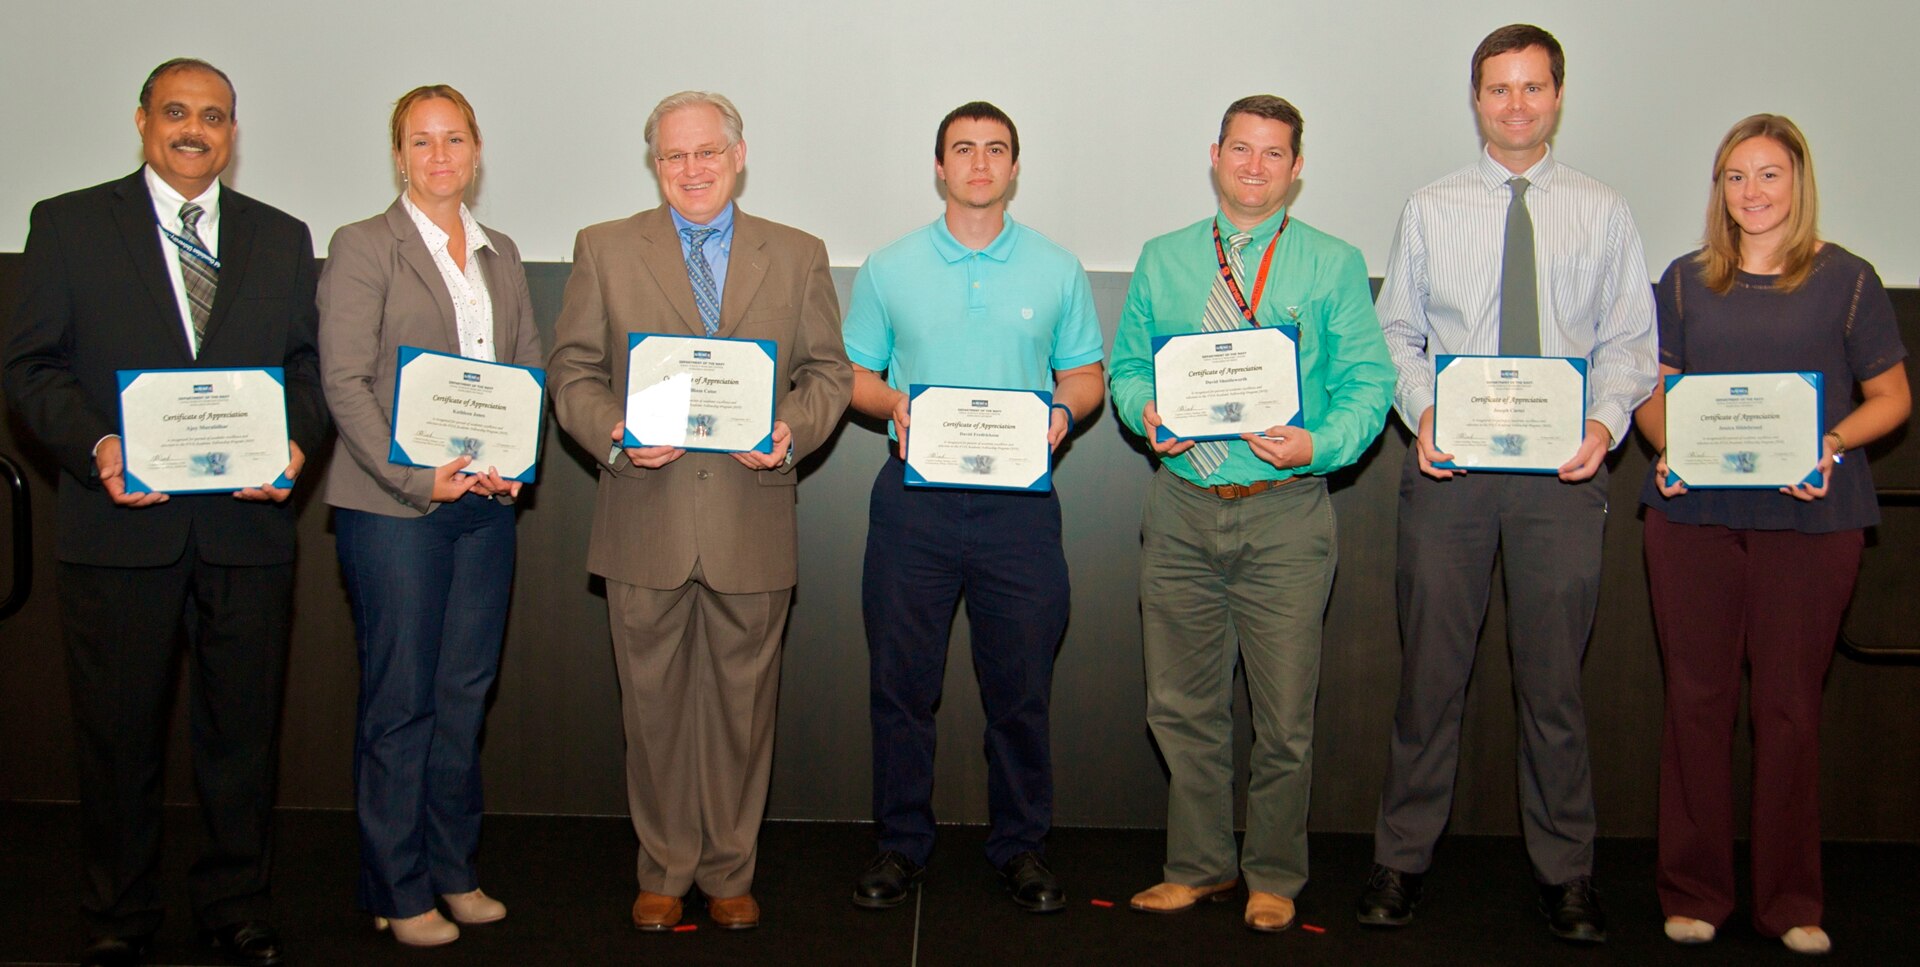 IMAGE: DAHLGREN, Va. - Ajoy Muralidhar, Kathleen Jones, William Catoe, David Fredrickson, David Shuttleworth, Joseph Carter, and Jessica Hildebrand, (l to r), are pictured with their certificates of achievement at the 2017 Naval Surface Warfare Center Dahlgren Division (NSWCDD) academic awards ceremony. The government civilians were among 13 employees selected for the fiscal year 2018 Academic Fellowship Program. The competitive program accelerates academic and professional growth of employees and contributes to the increase in degrees awarded at Dahlgren. This year, nine of the selected employees are progressing in their master’s degree programs in fields of study that include cyber security engineering, business administration, systems engineering, engineering management, and computer science. One selected employee is working on a bachelor's degree in physics through the program. The command’s academic fellowship program is also helping three engineers complete doctoral degree programs - one in electrical engineering, another in engineering management and systems engineering, and the third in modeling and simulation.